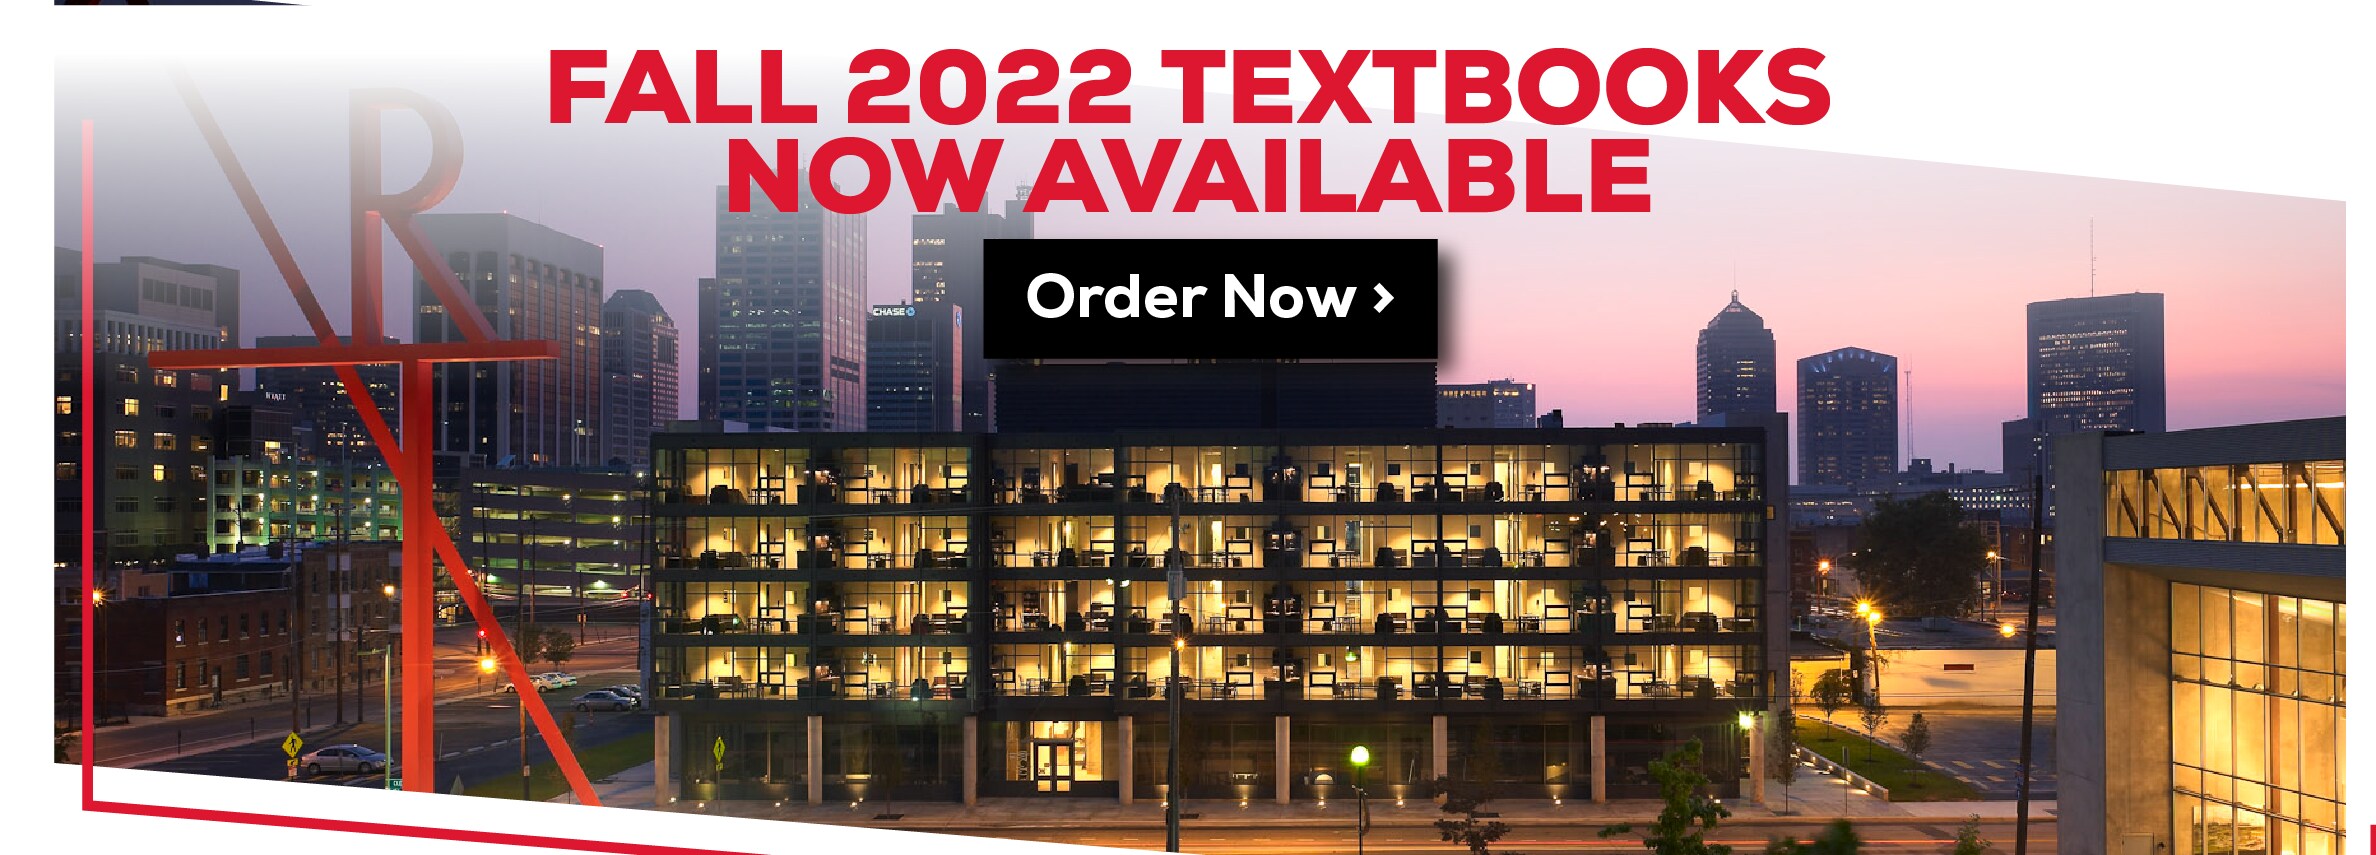 Fall 2022 Textbooks Now Available. Order Now.